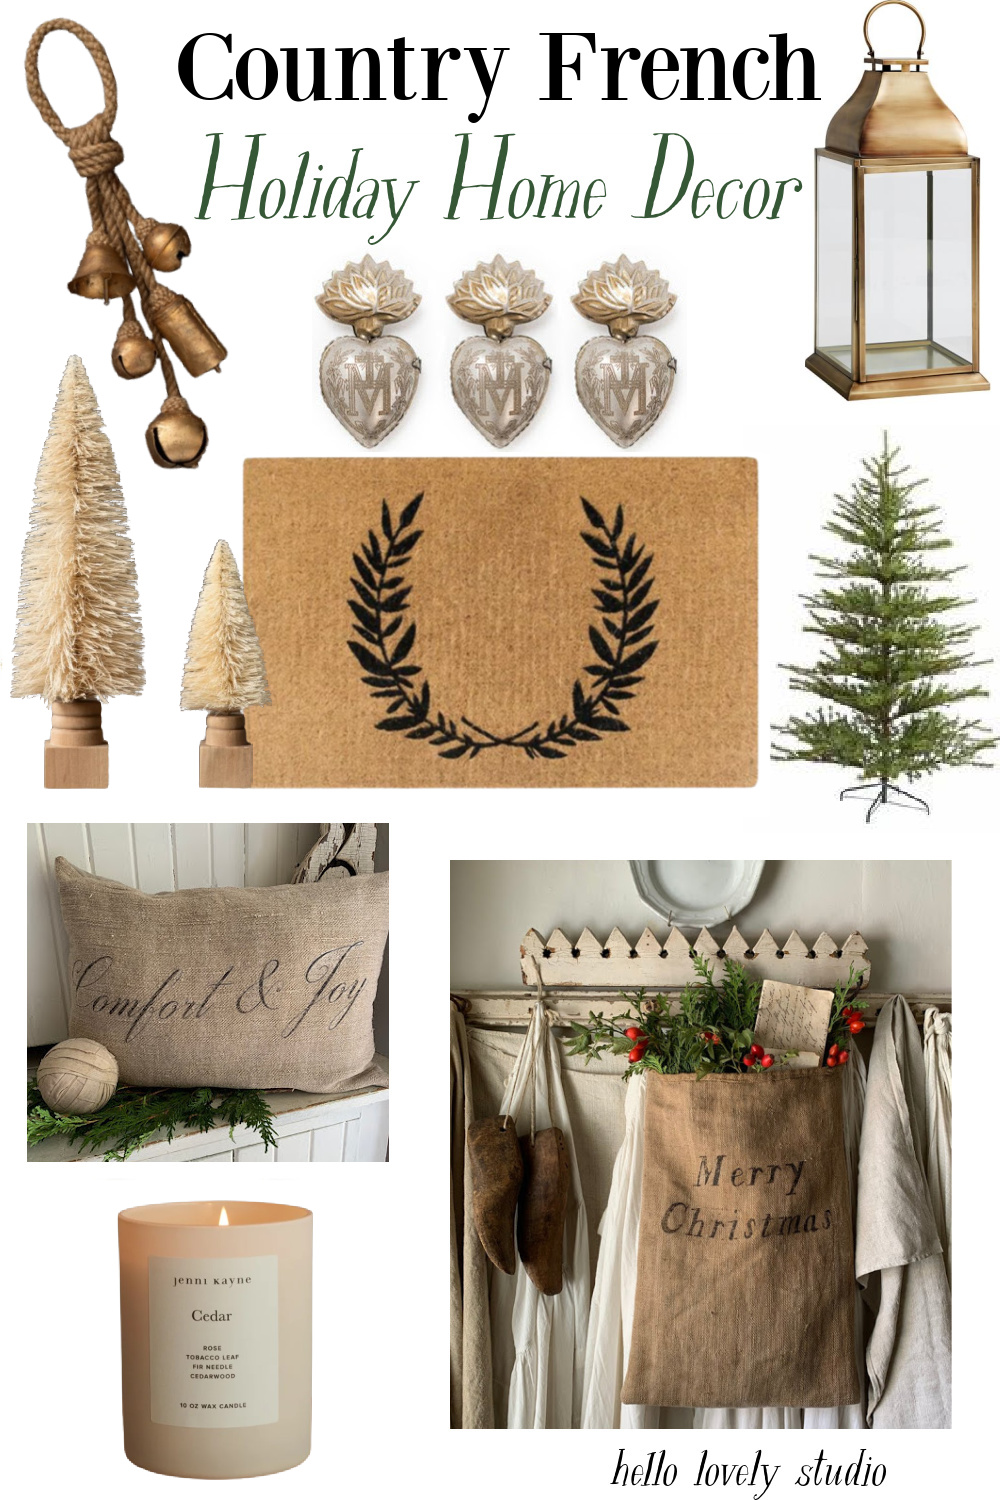 Country French Holiday Home Decor on Hello Lovely Studio. #countryfrenchchristmsa #frenchchristmas #holidaydecor